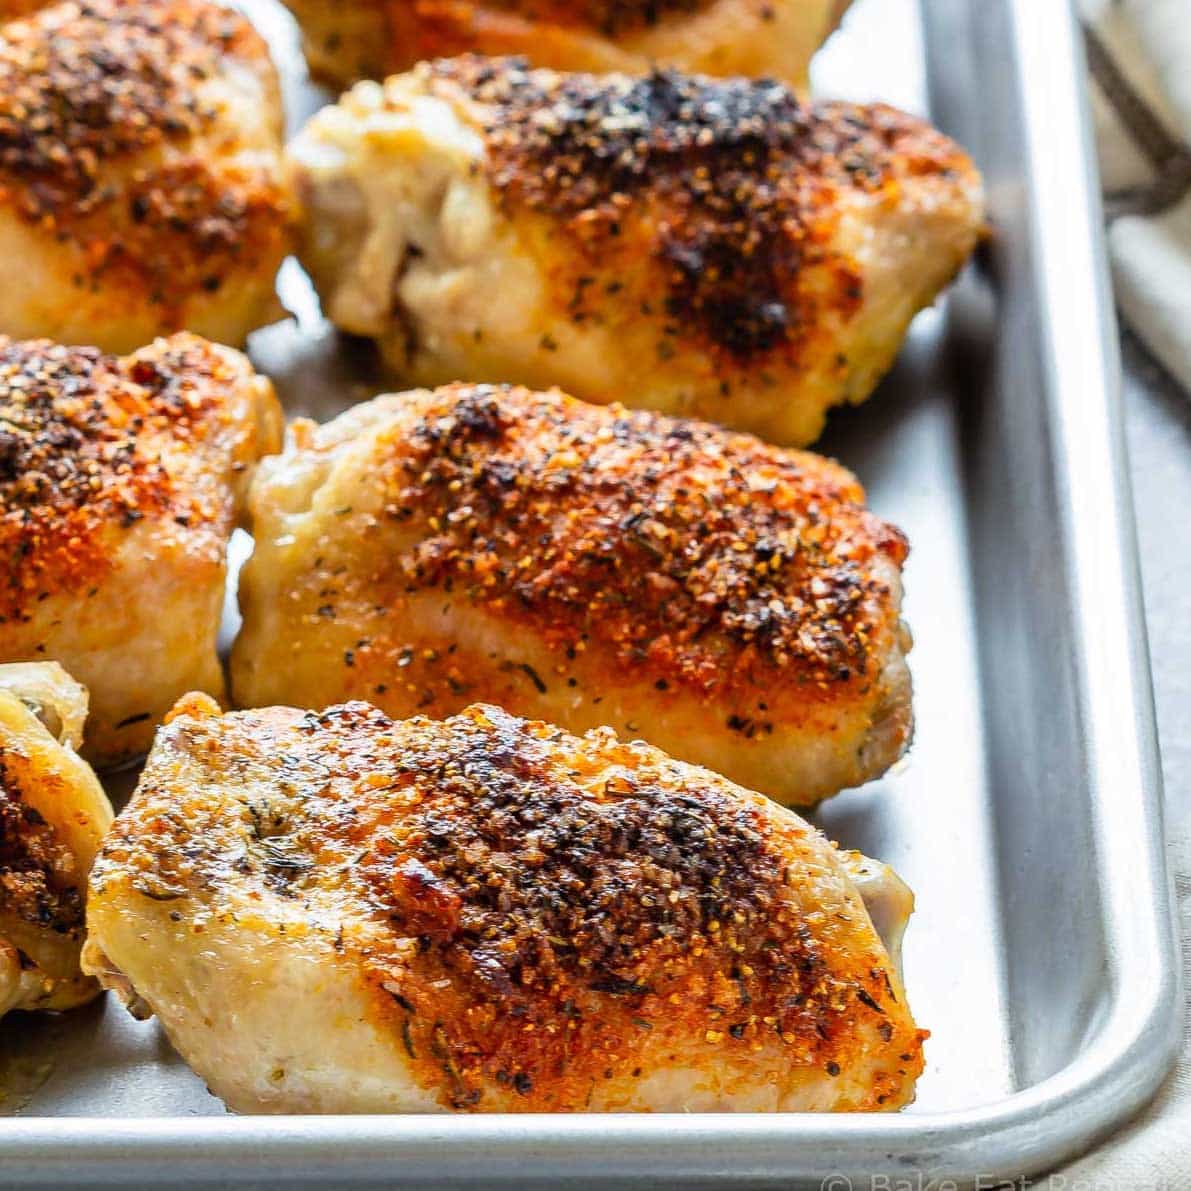 great baked chicken recipes